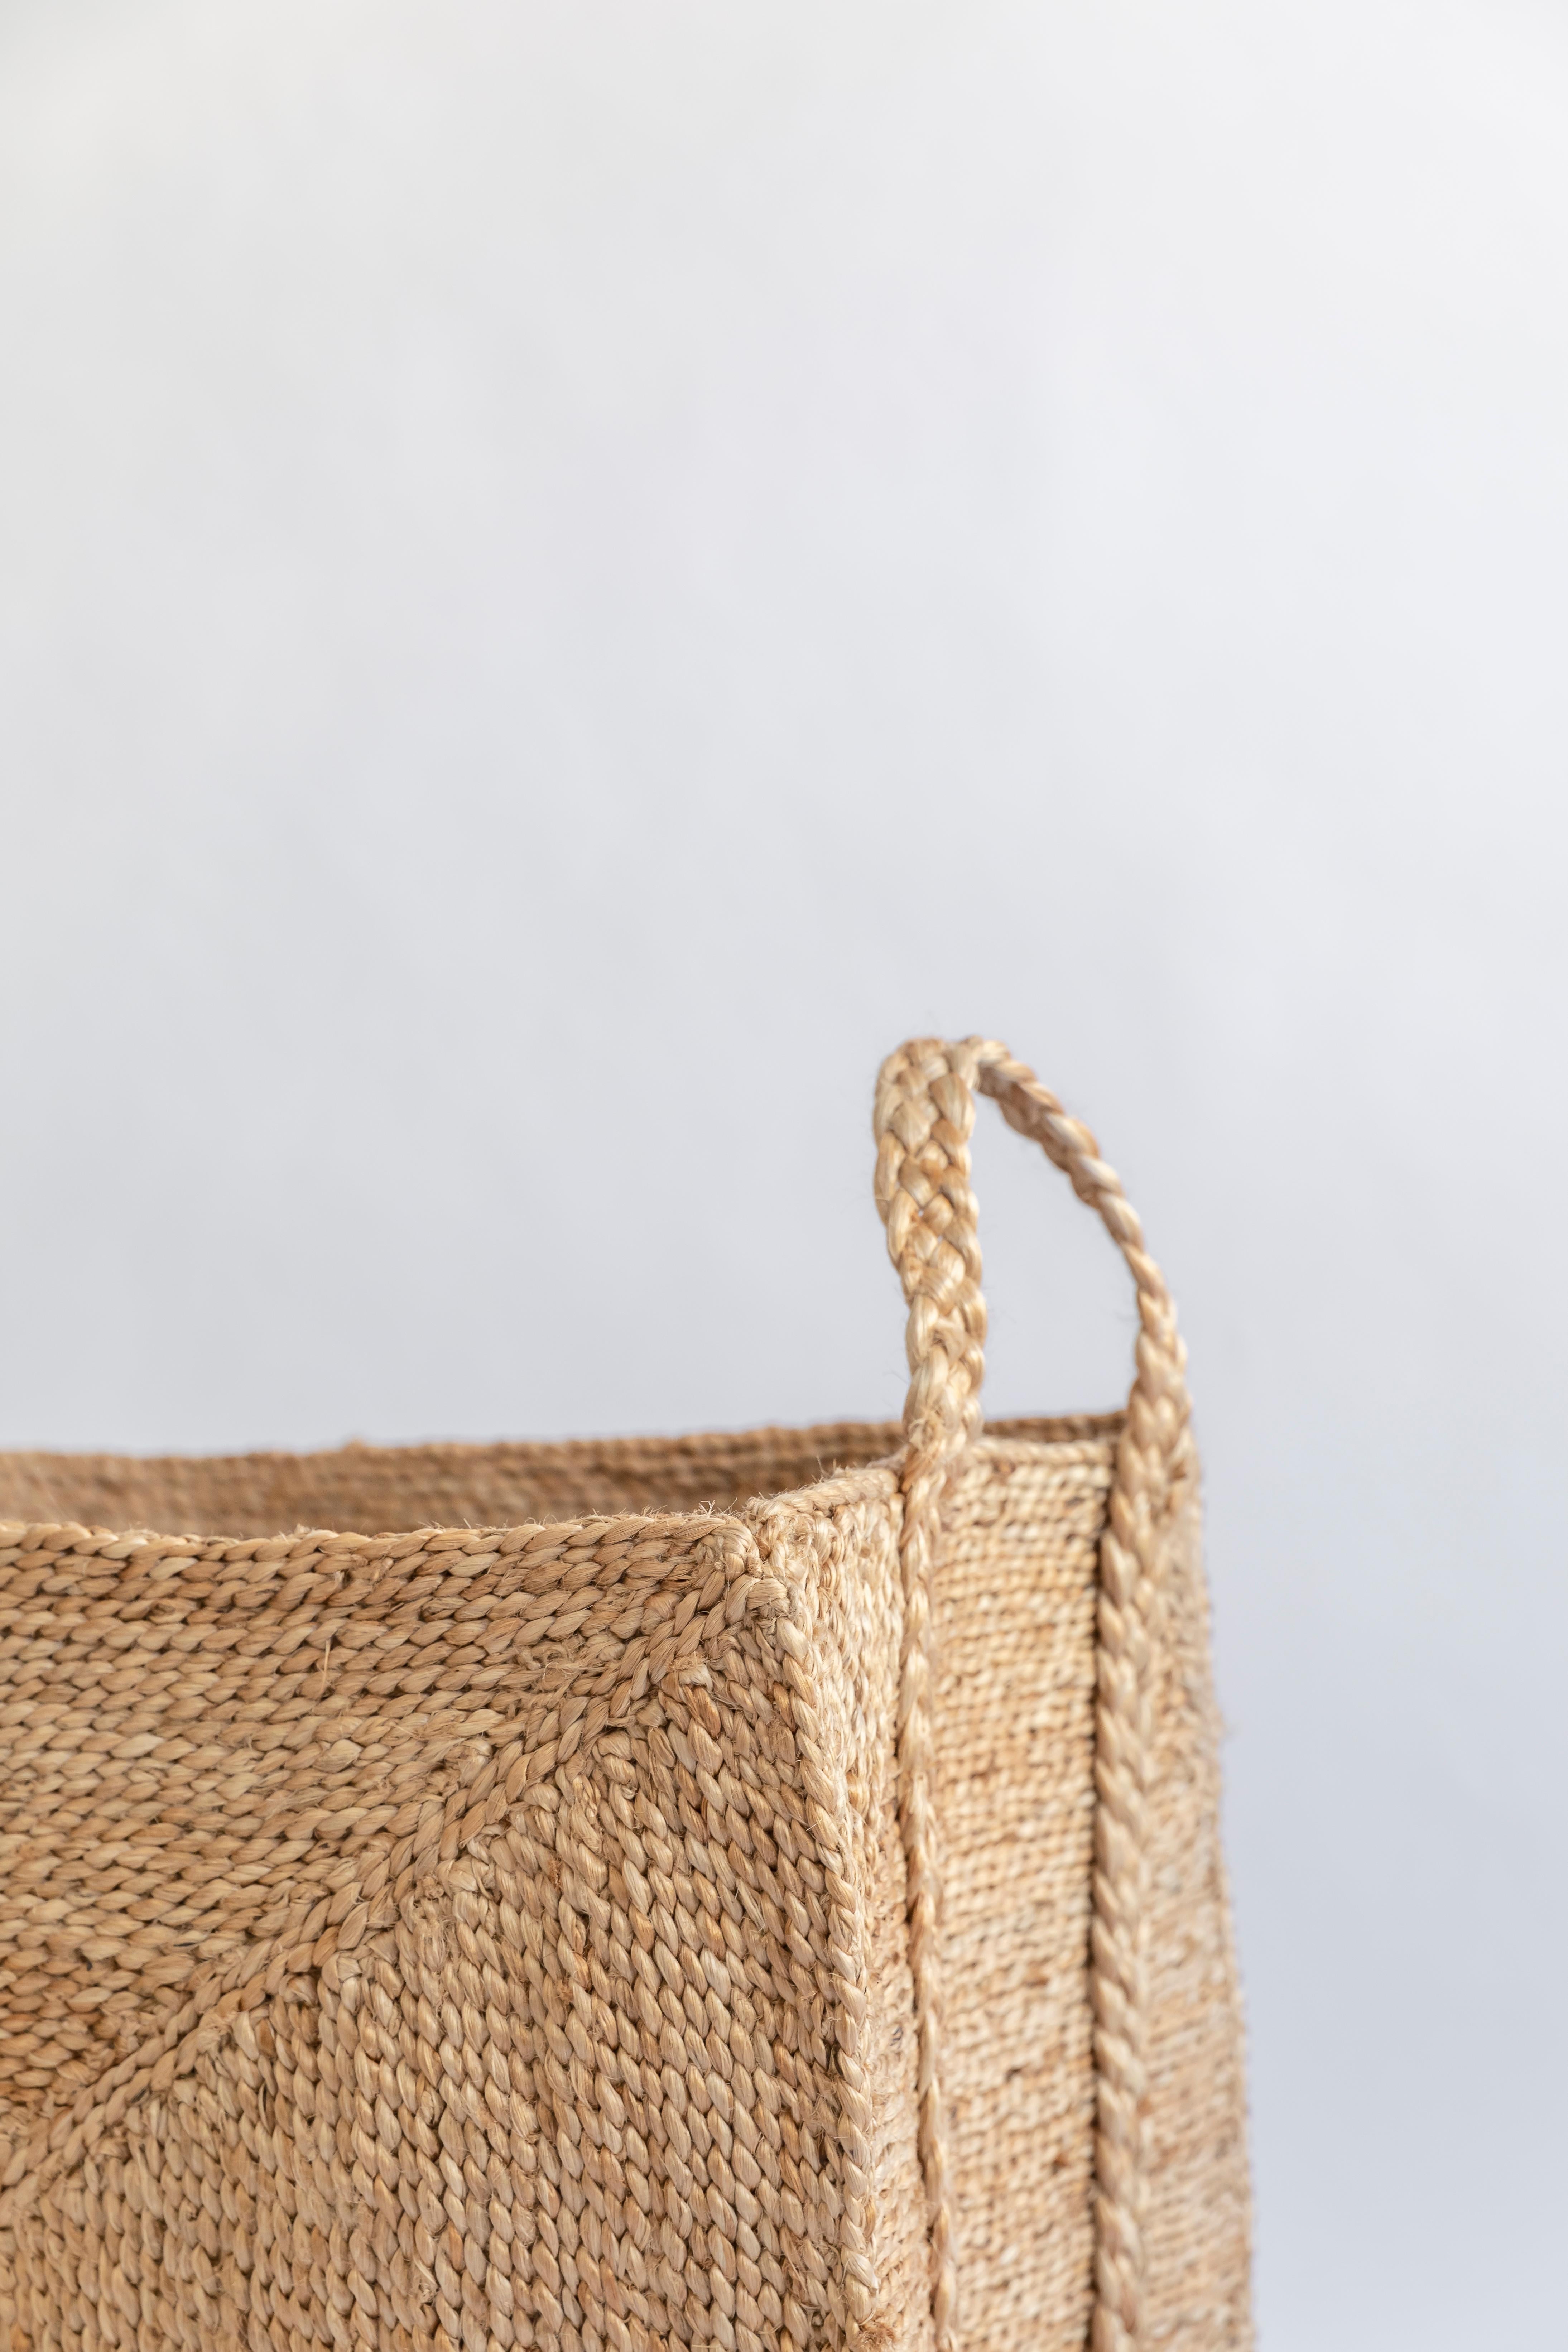 J'Jute Handmade Jute Basket Large, Natural In New Condition For Sale In Bondi, NSW